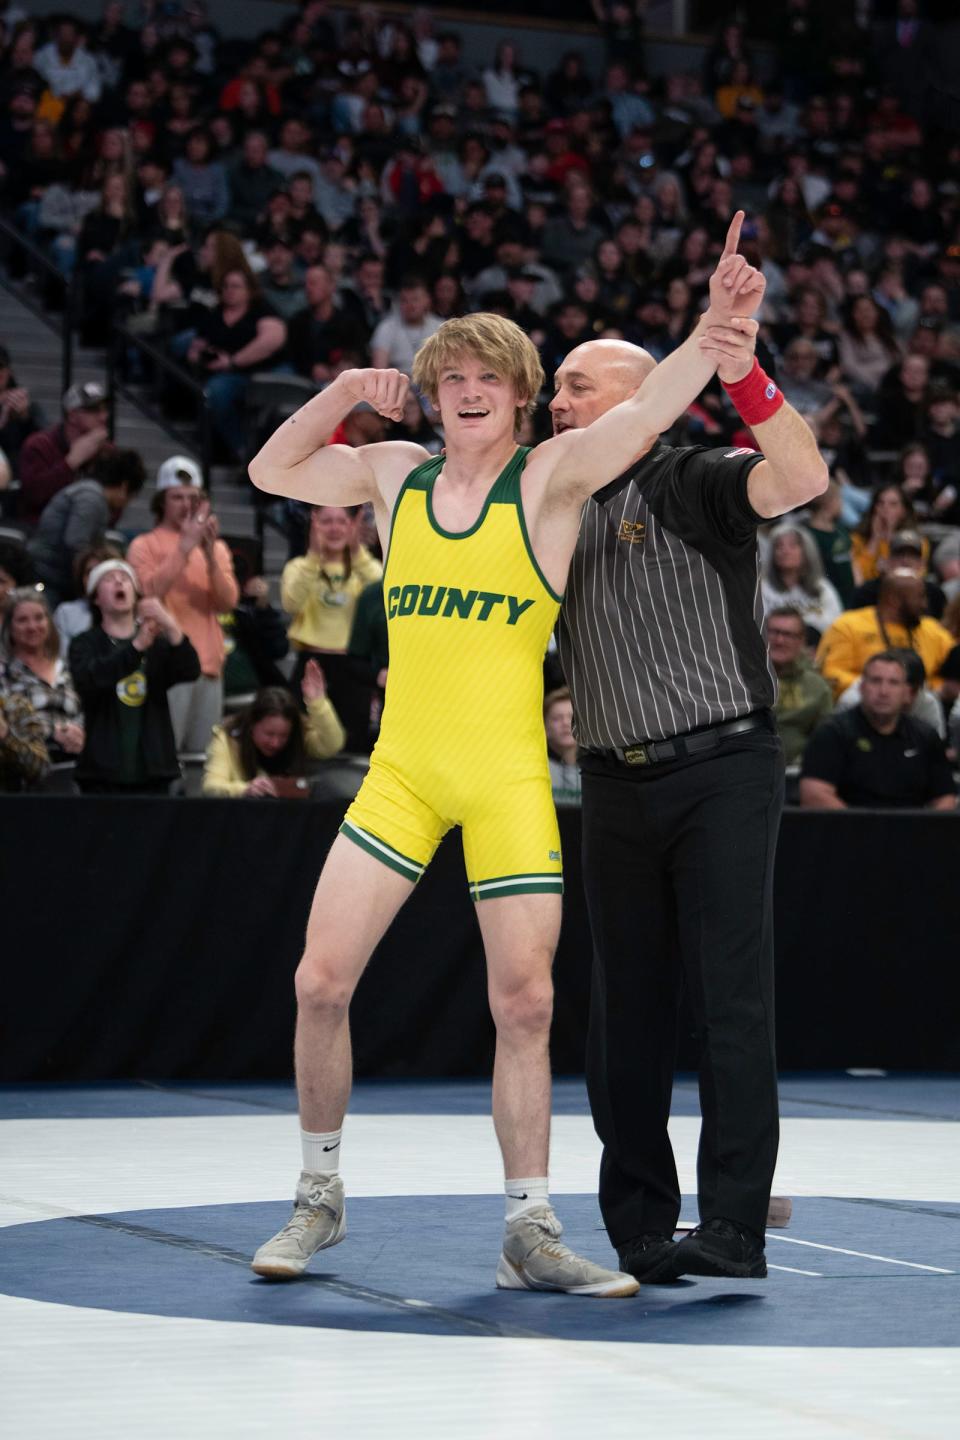 Pueblo County's Boden White has his hand raised as the winner of the 138-pound championship match of the Class 4A state wrestling tournament at Ball Arena on Saturday, Feb. 18, 2023.